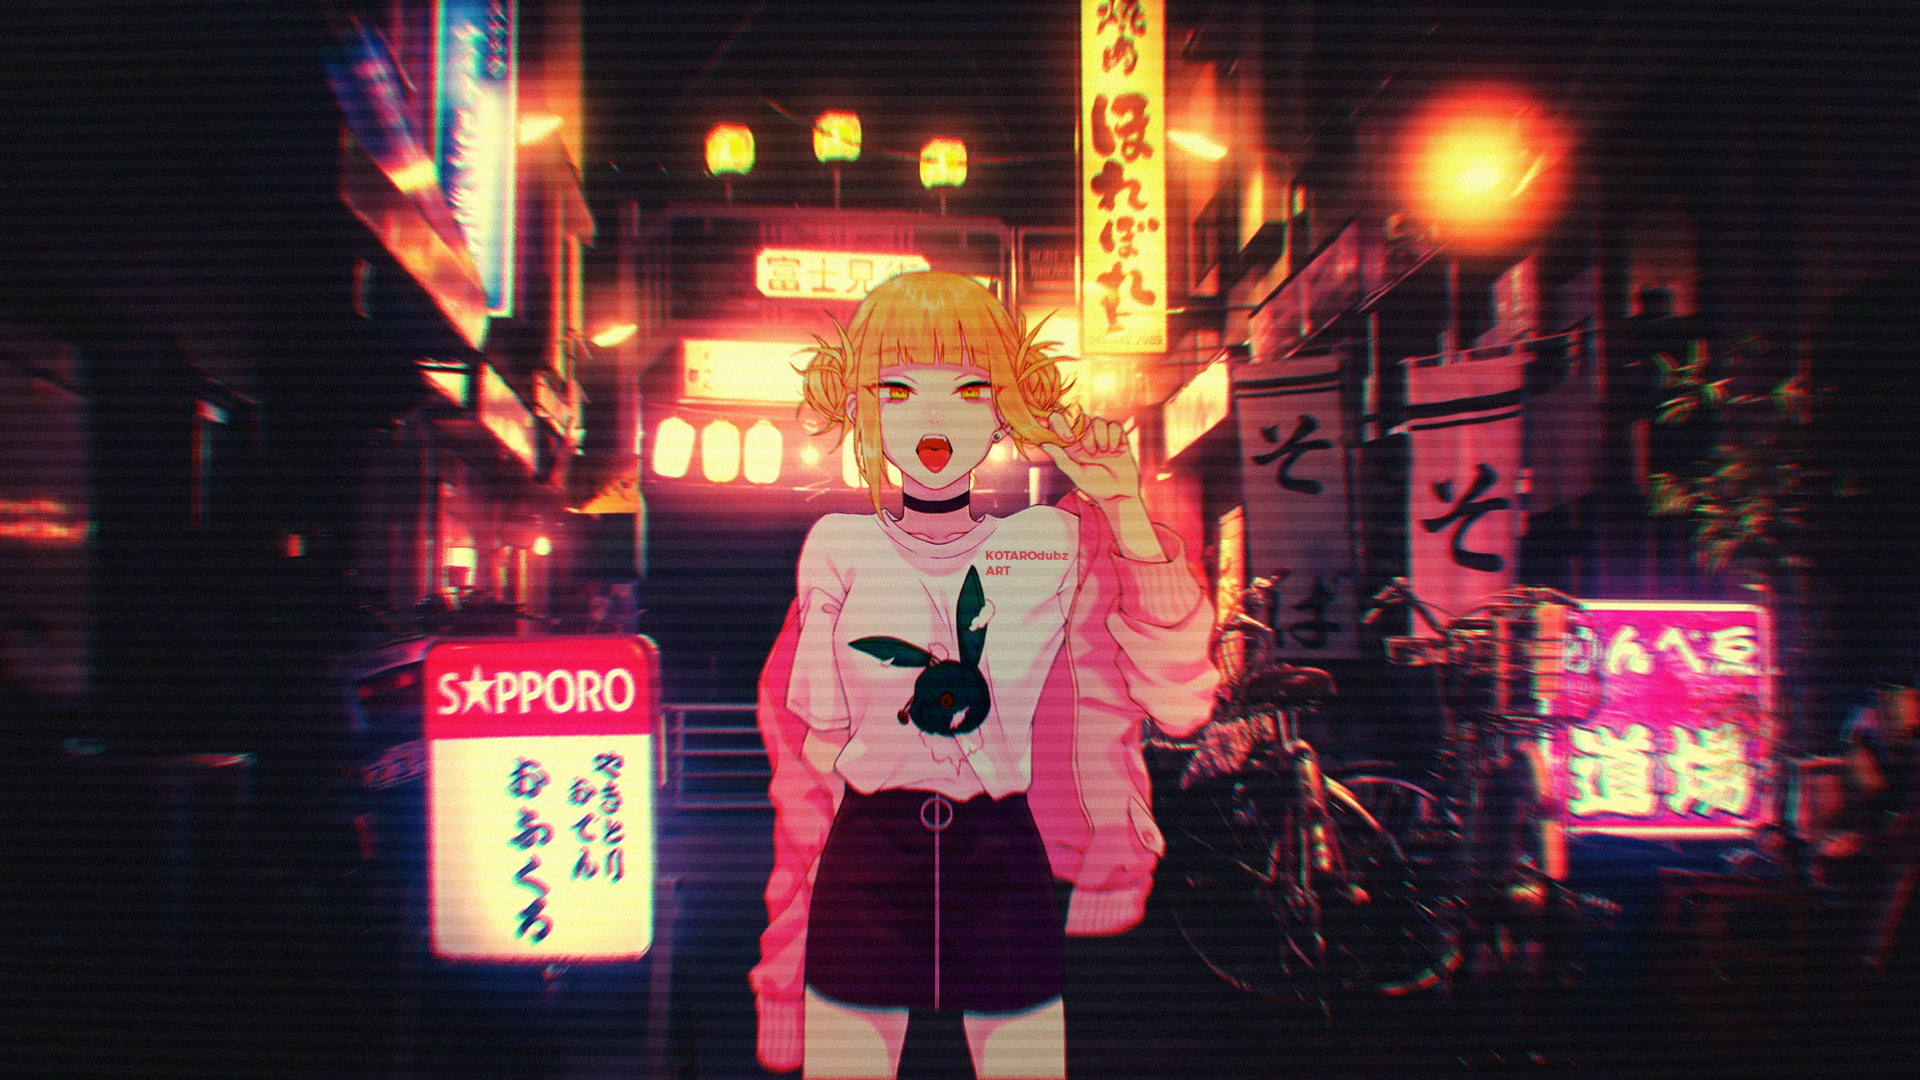 anime, anime girls, simple, simple background, glitch art, VHS